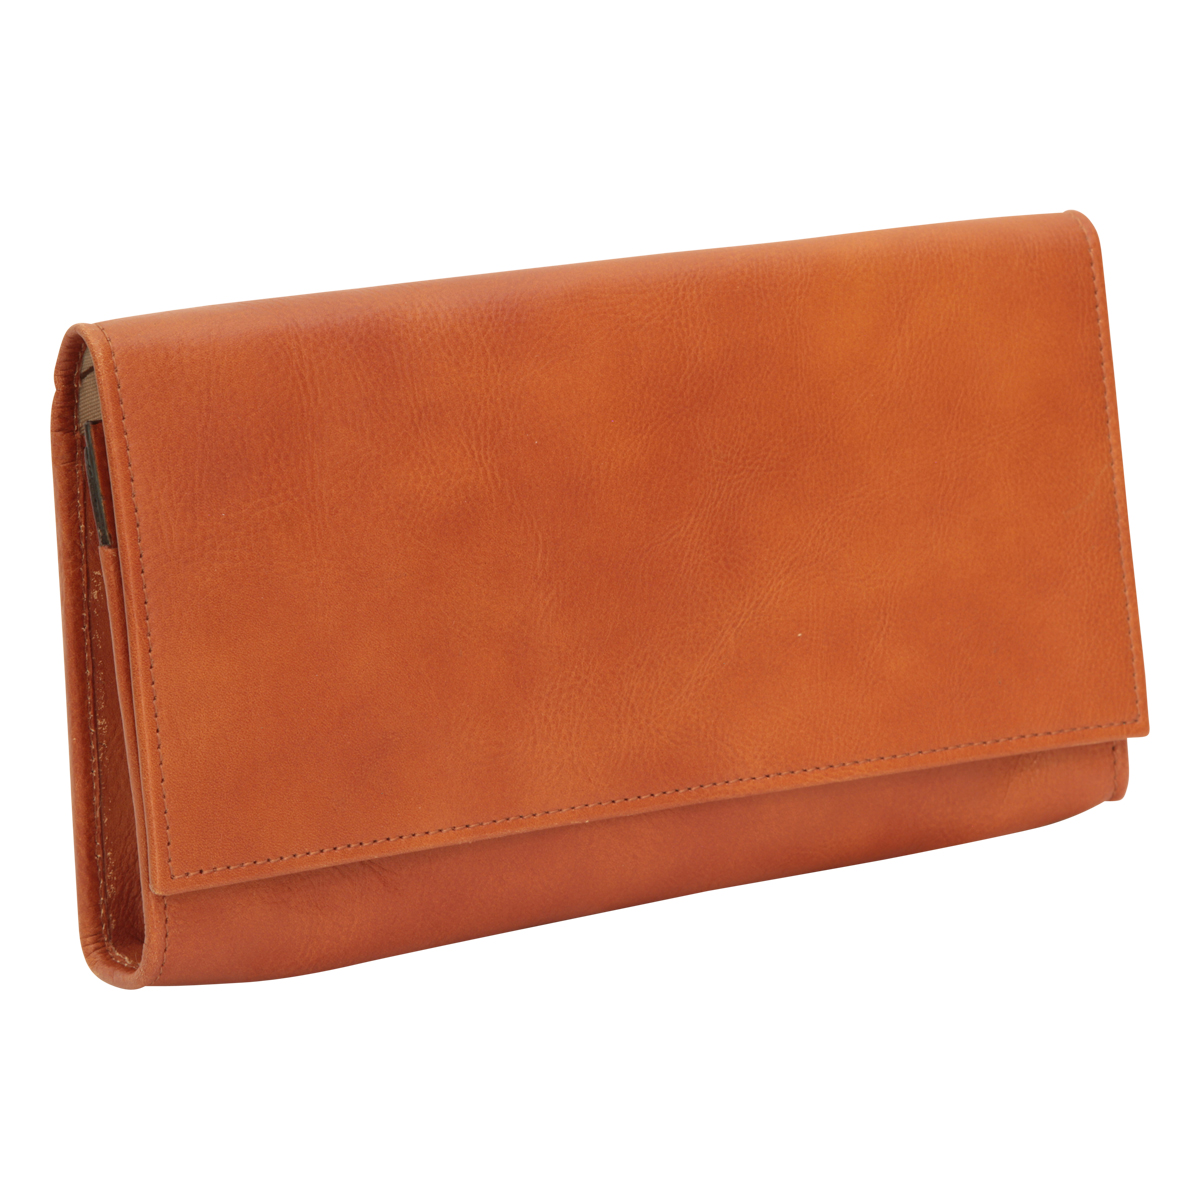 Leather Portfolio - Colonial | 553889CO | EURO | Old Angler Firenze